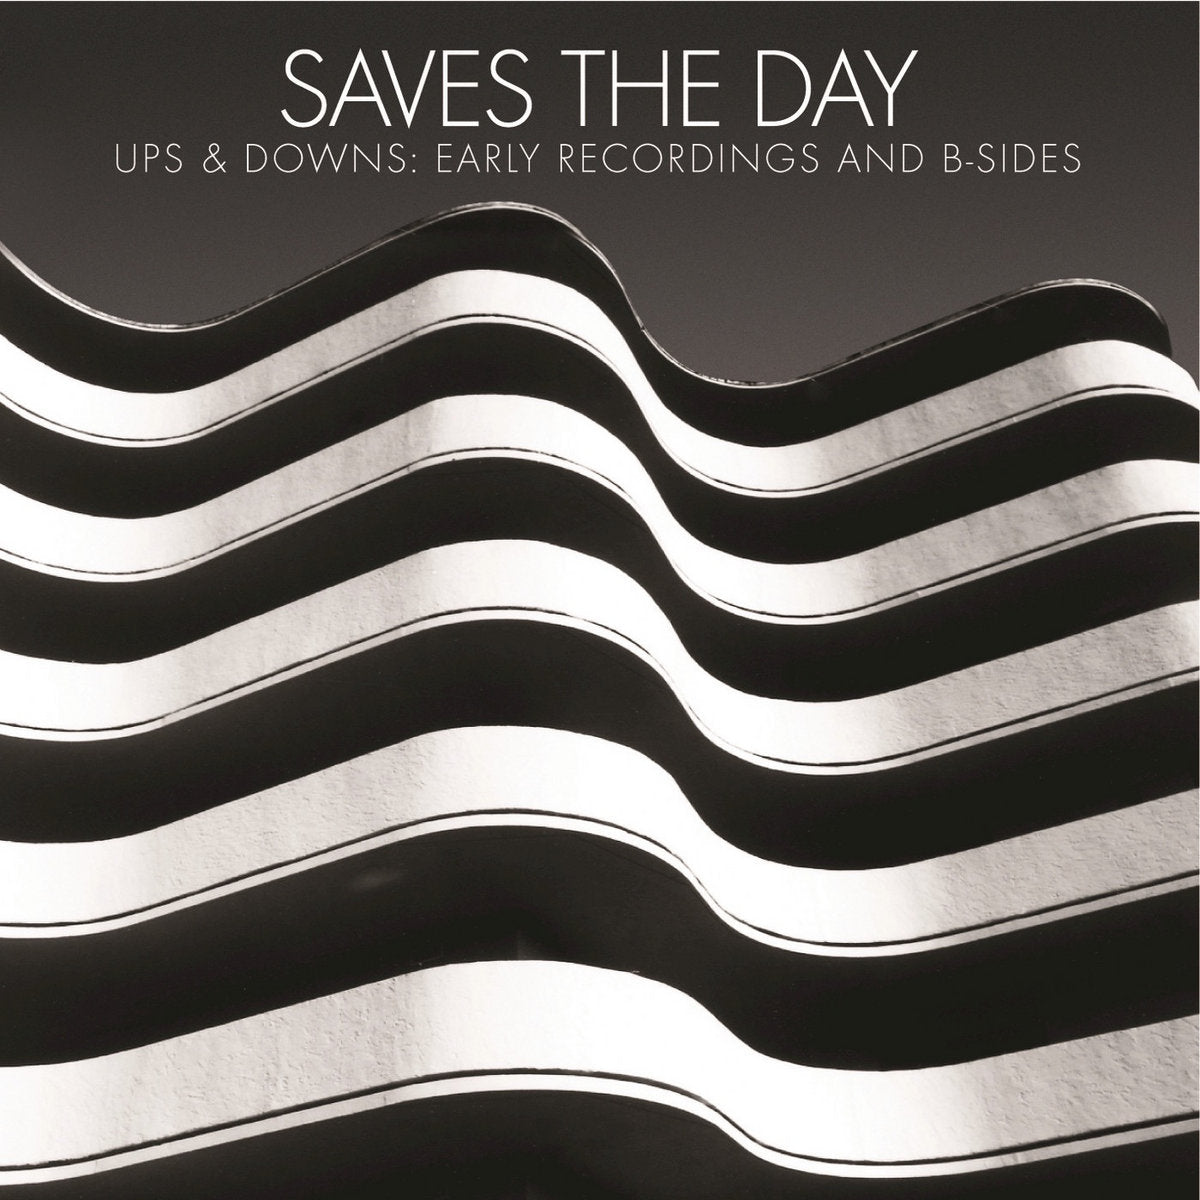 Saves the Day "Ups & Downs: Early Recordings And B-sides" 12" Vinyl